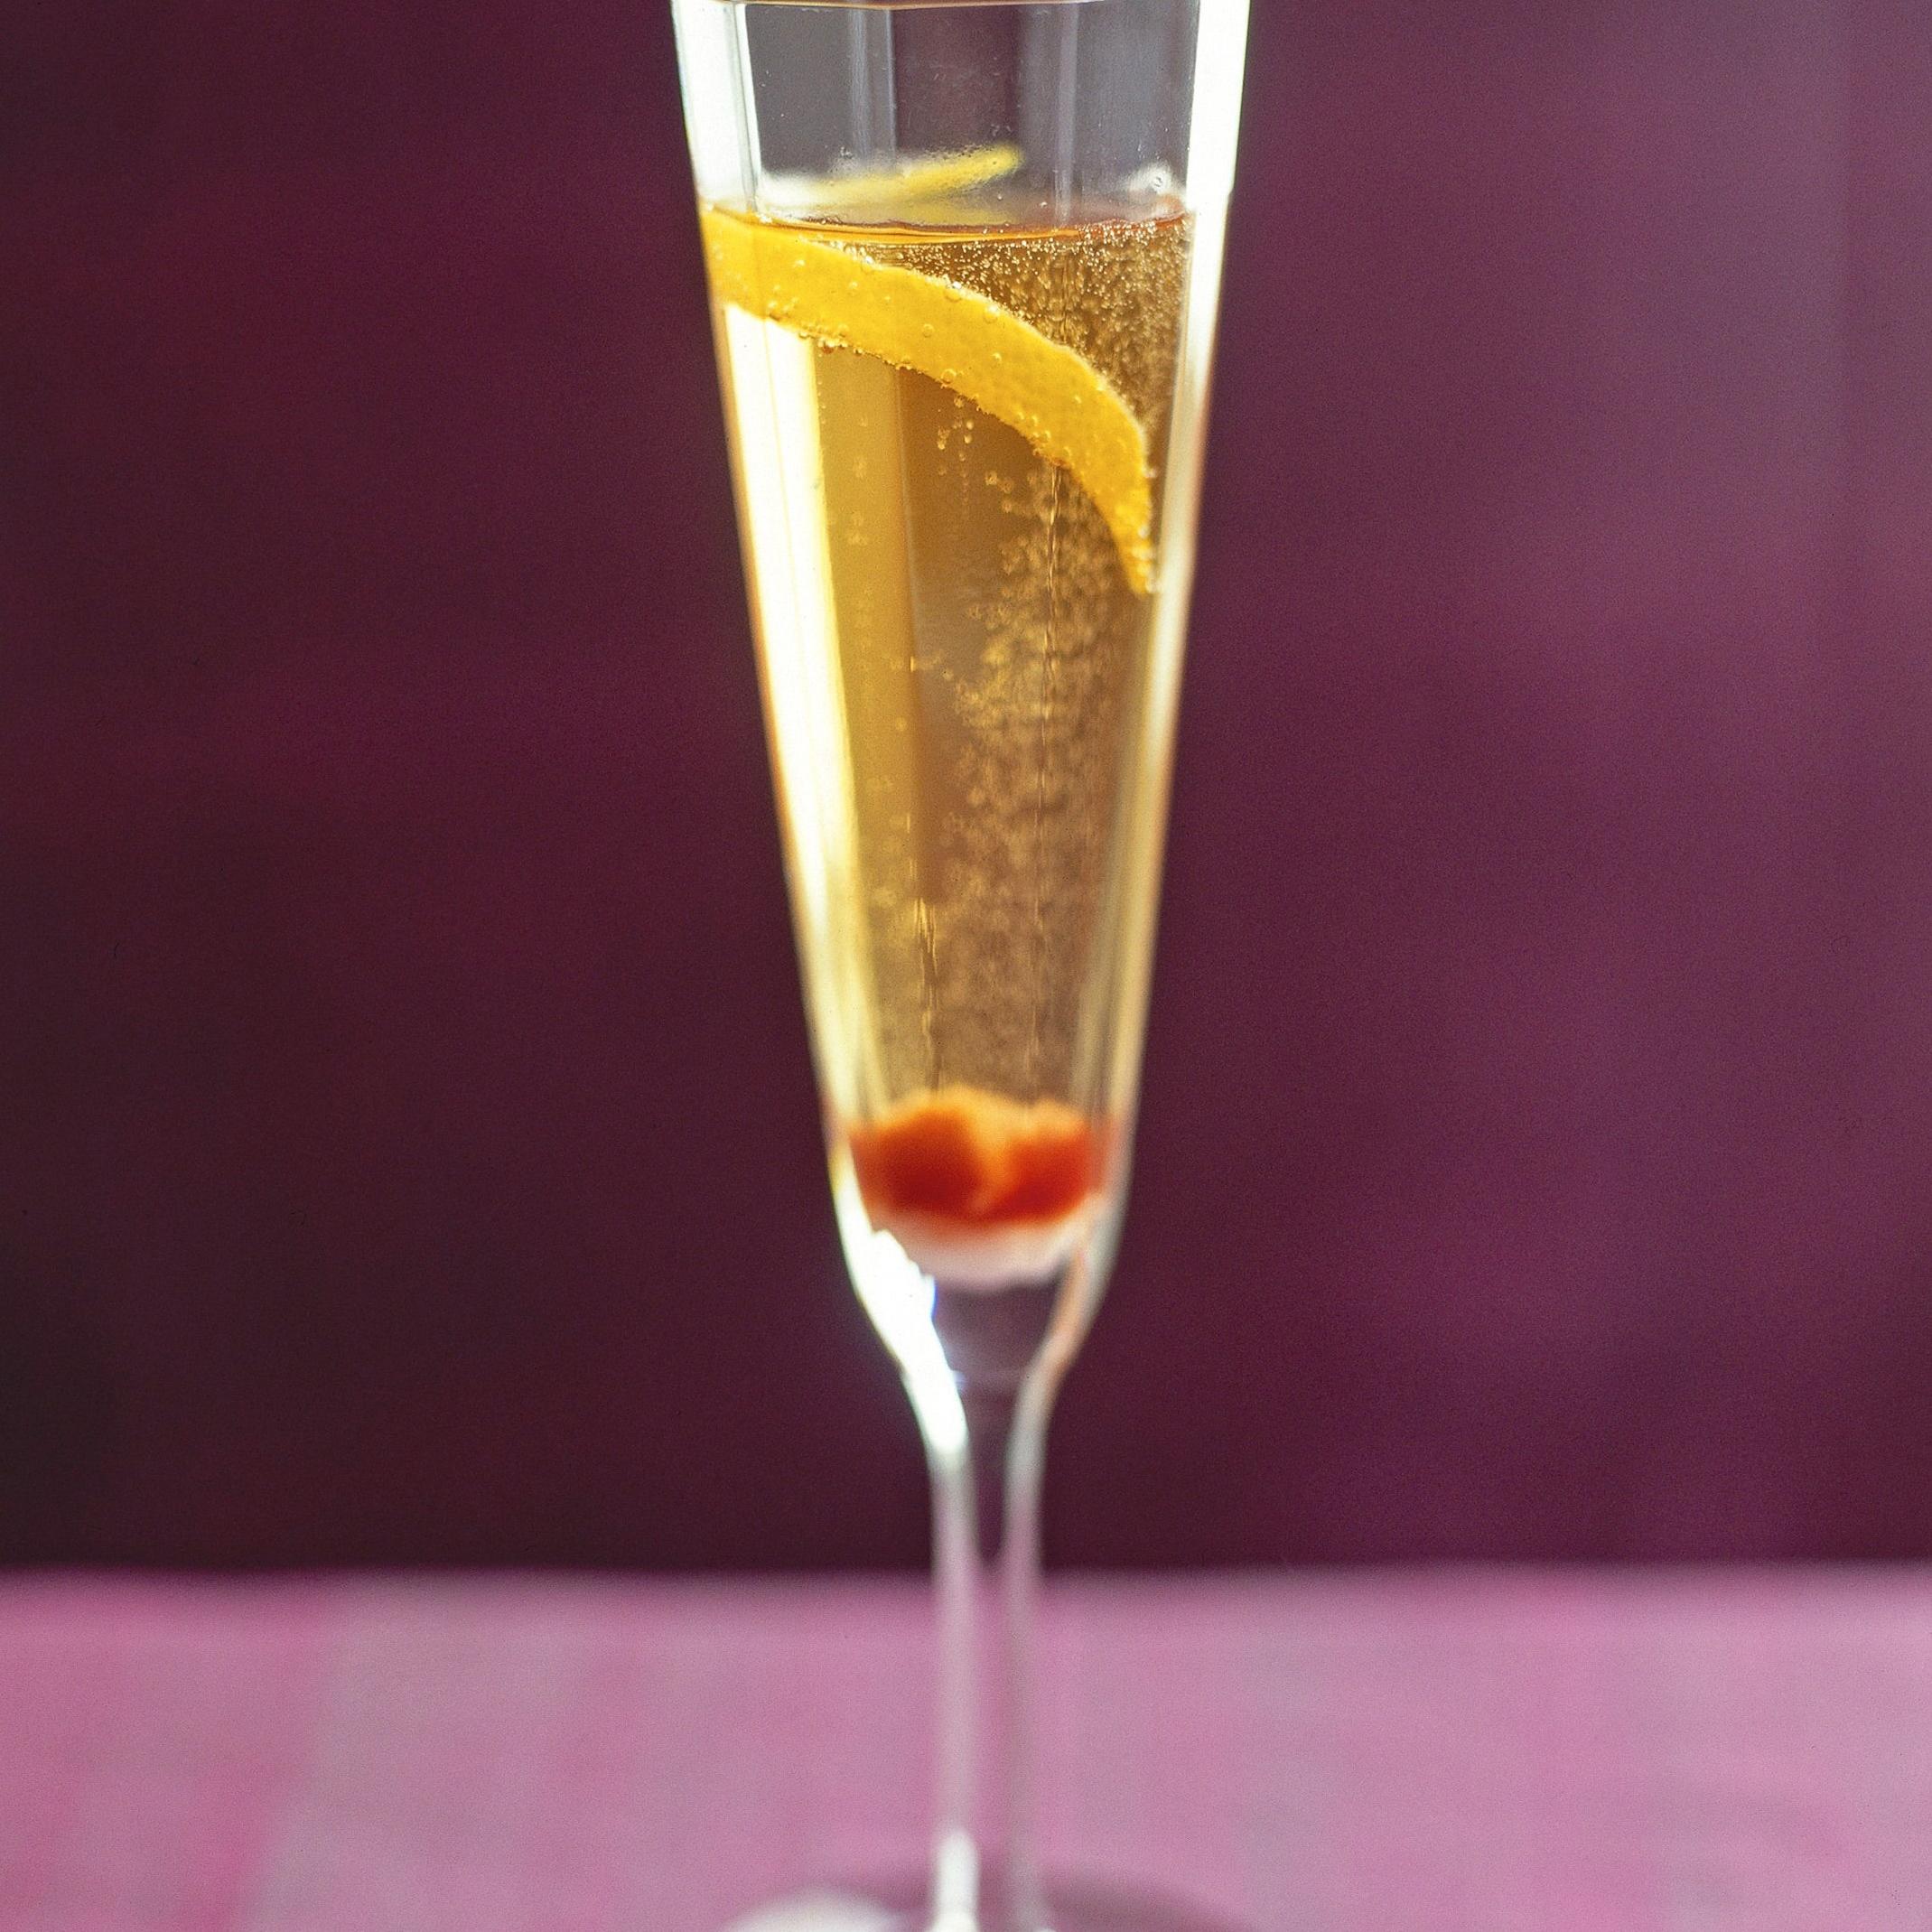  When life gives you champagne, make a champagne martini!